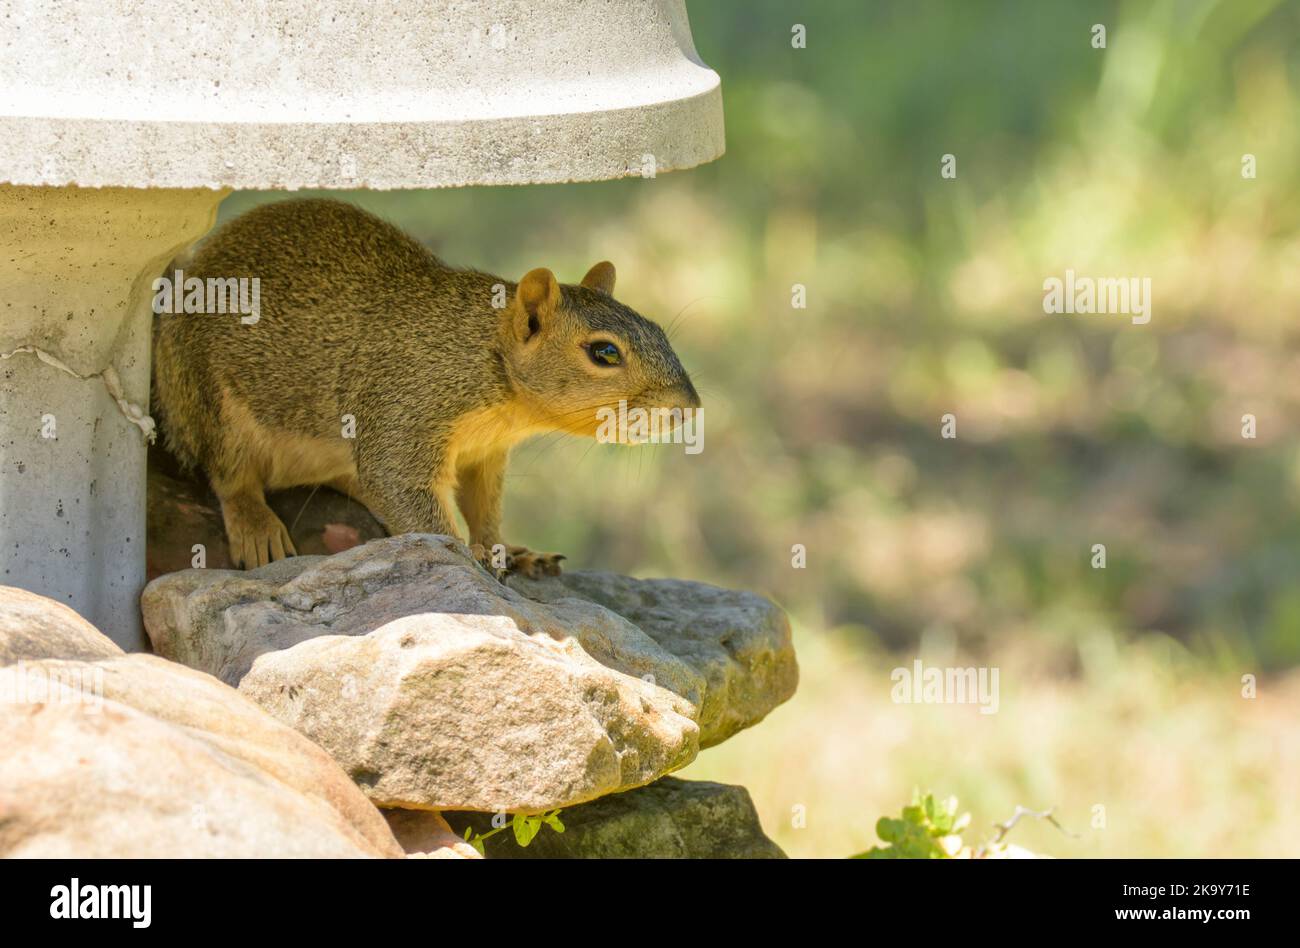 Squirrel in the shade of a concrete bird bath on a hot summer day Stock Photo